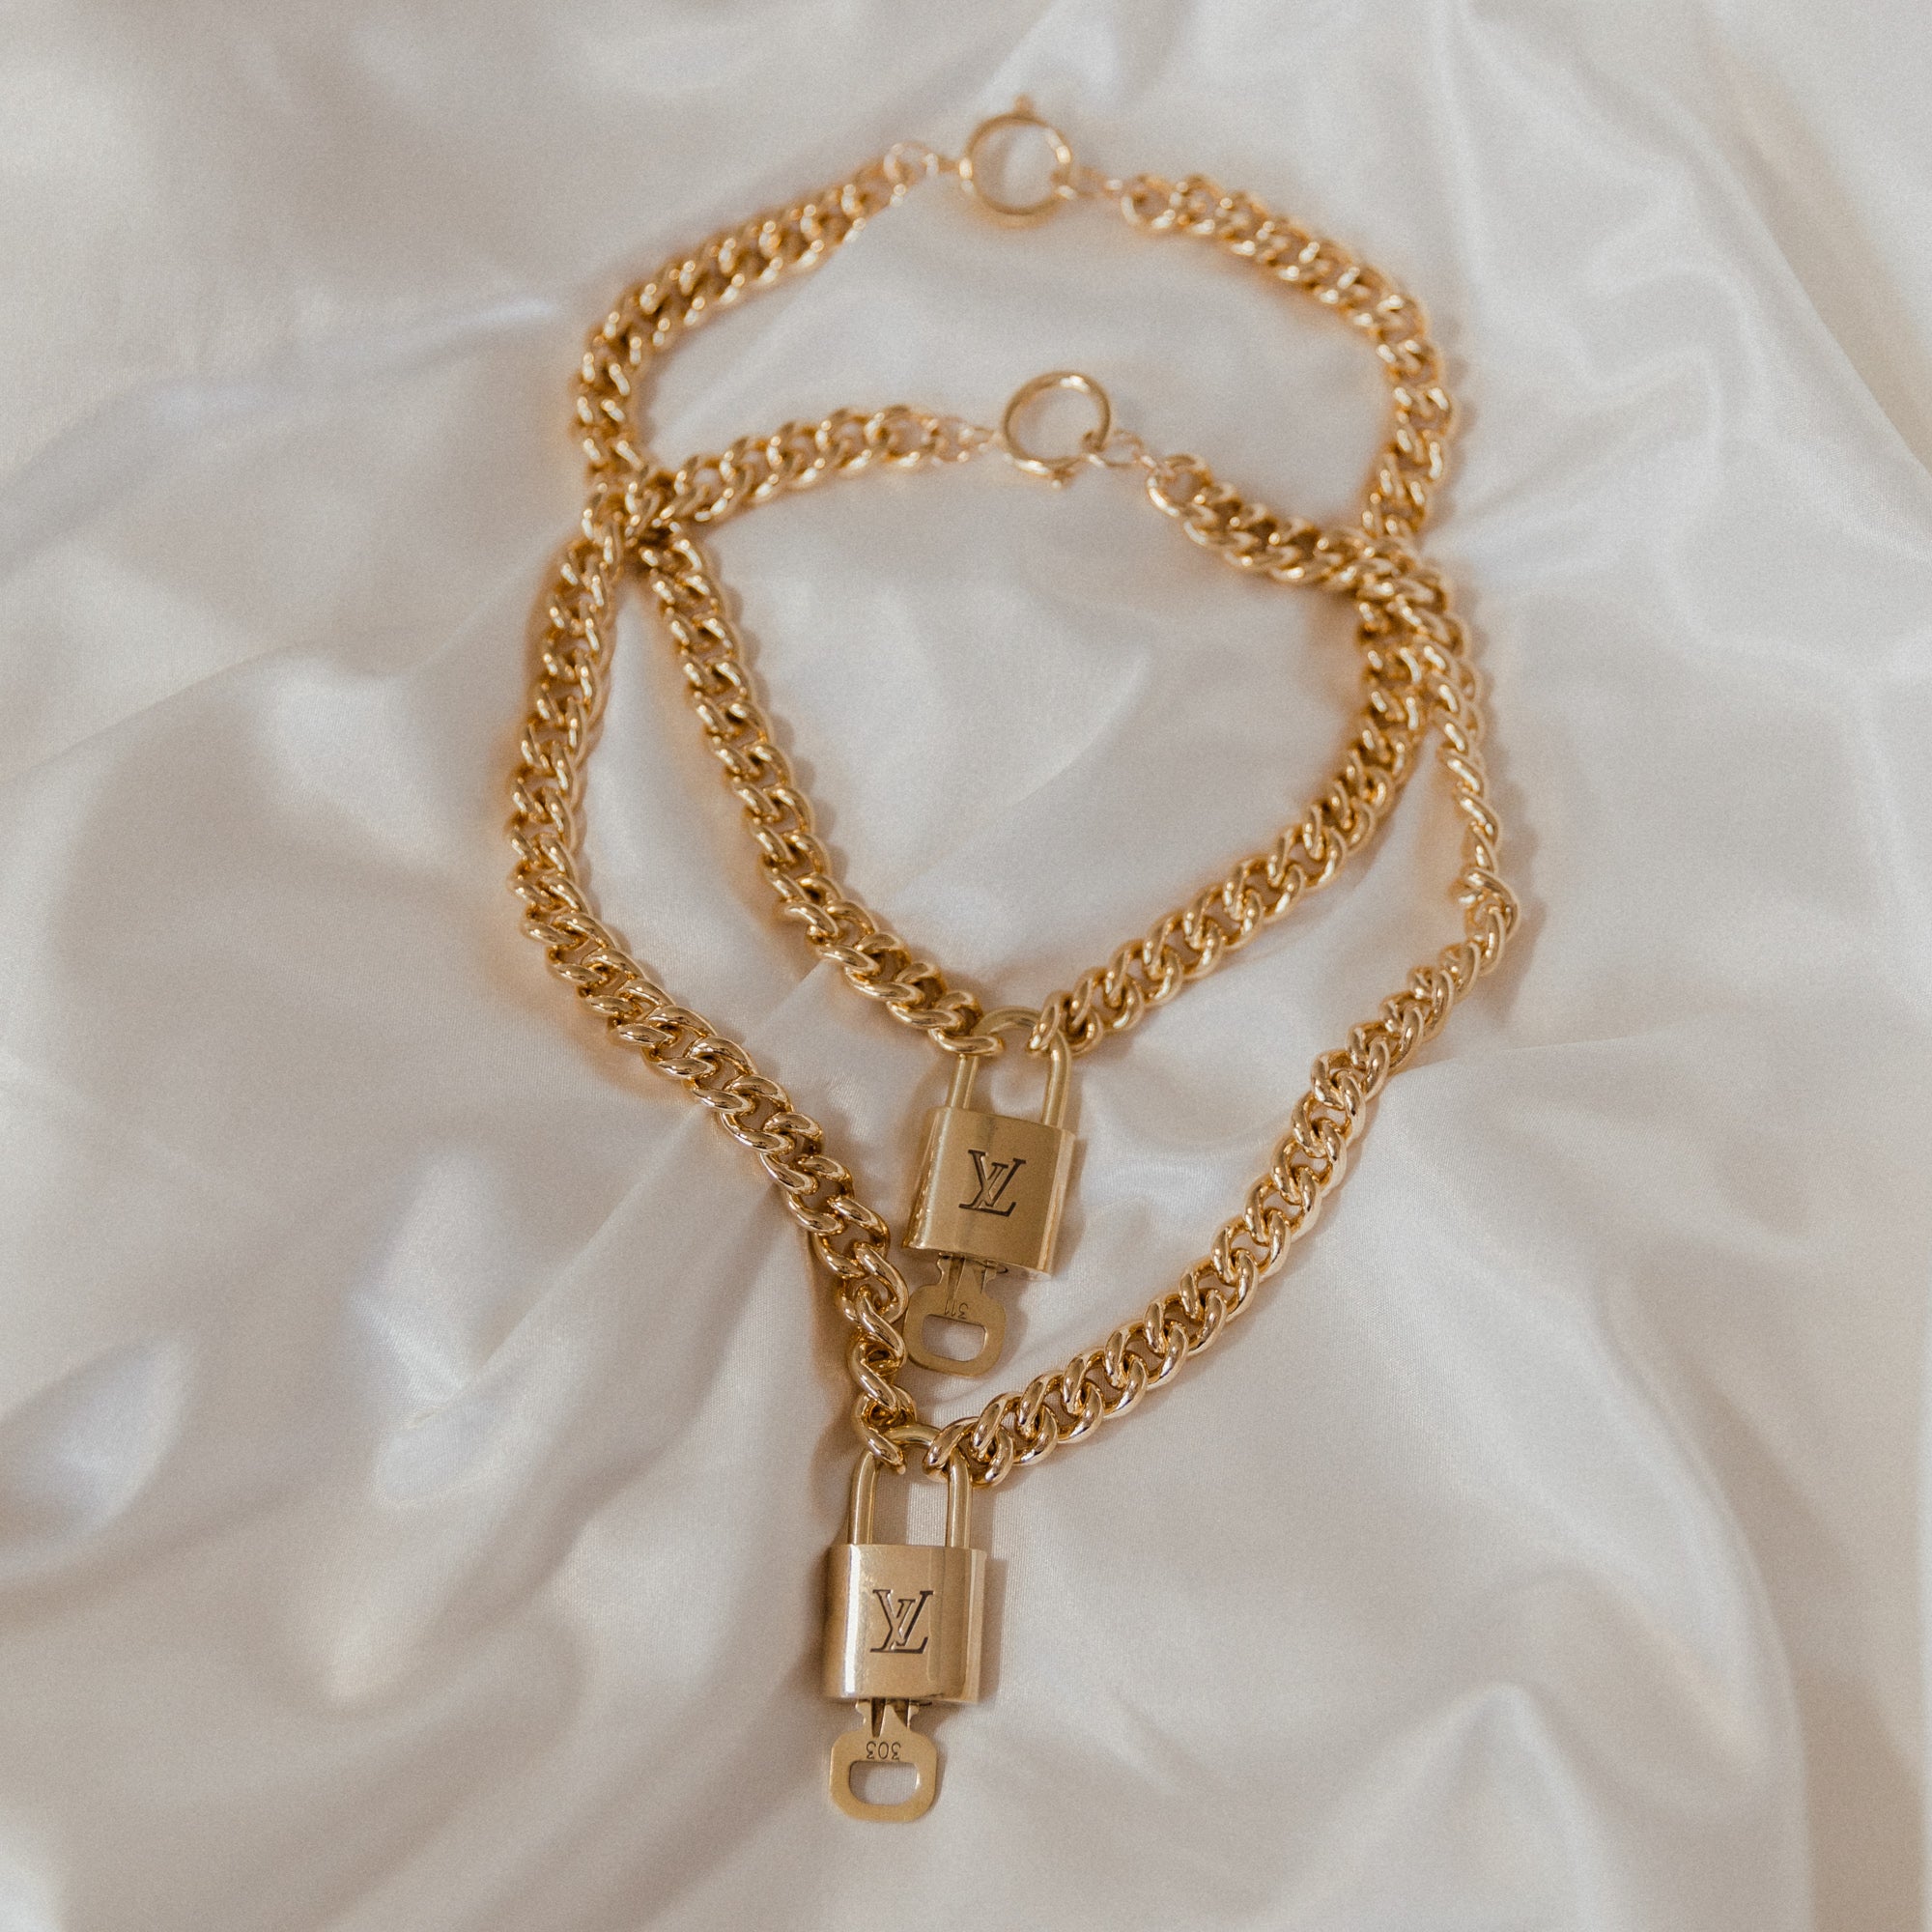 Vintage Louis Vuitton Lock Necklace - Shop Jewelry at BitterSweet